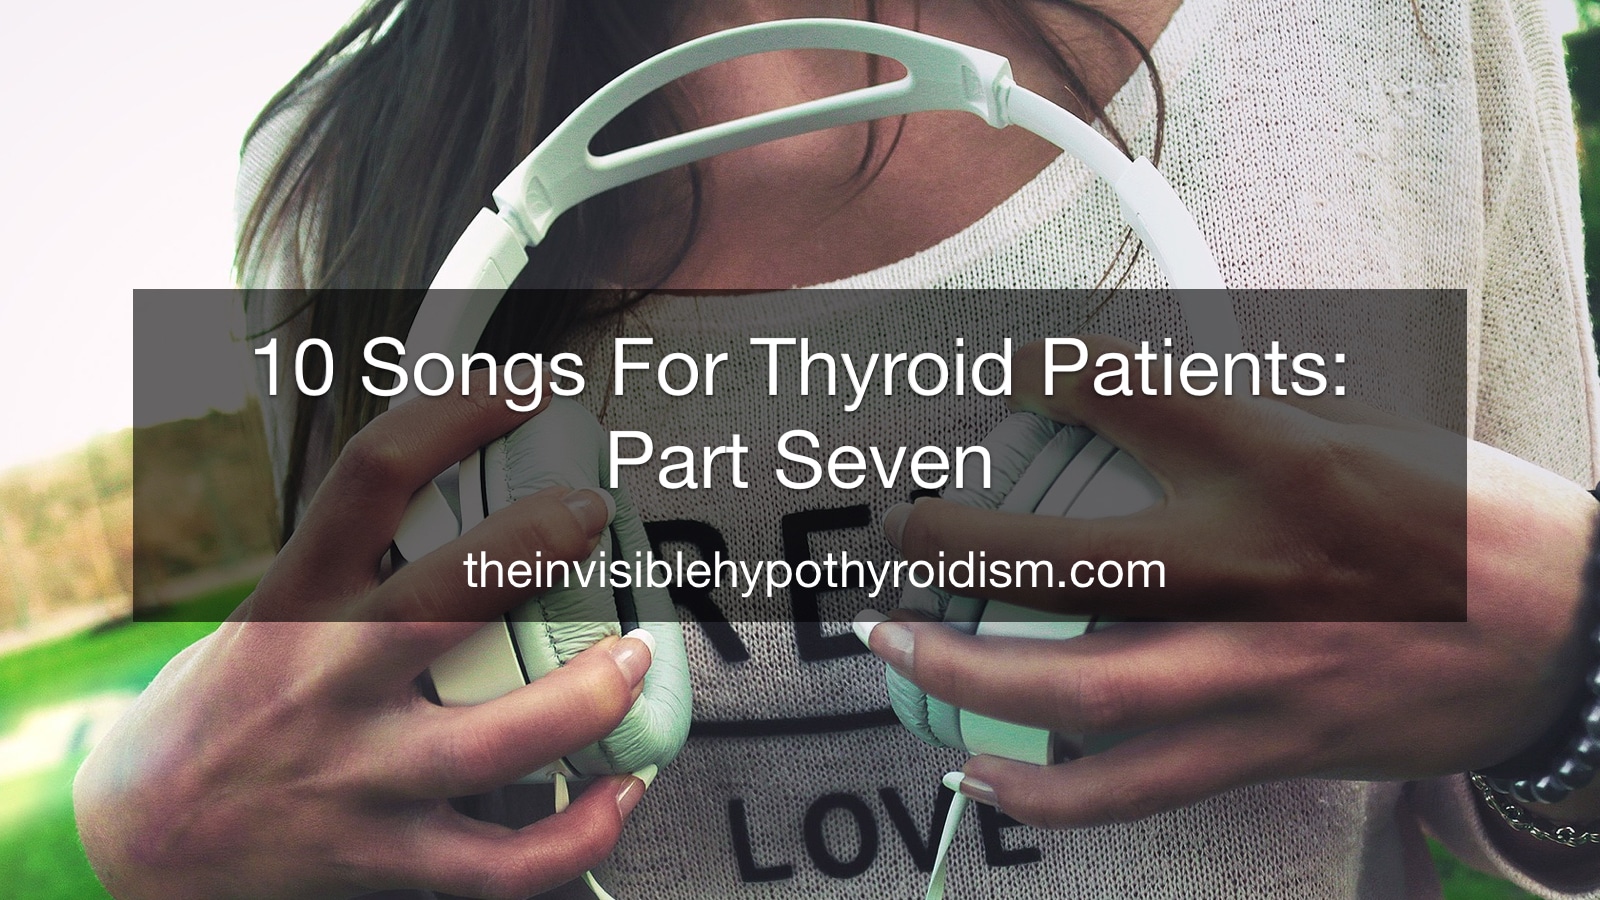 10 Songs For Thyroid Patients- Part Seven